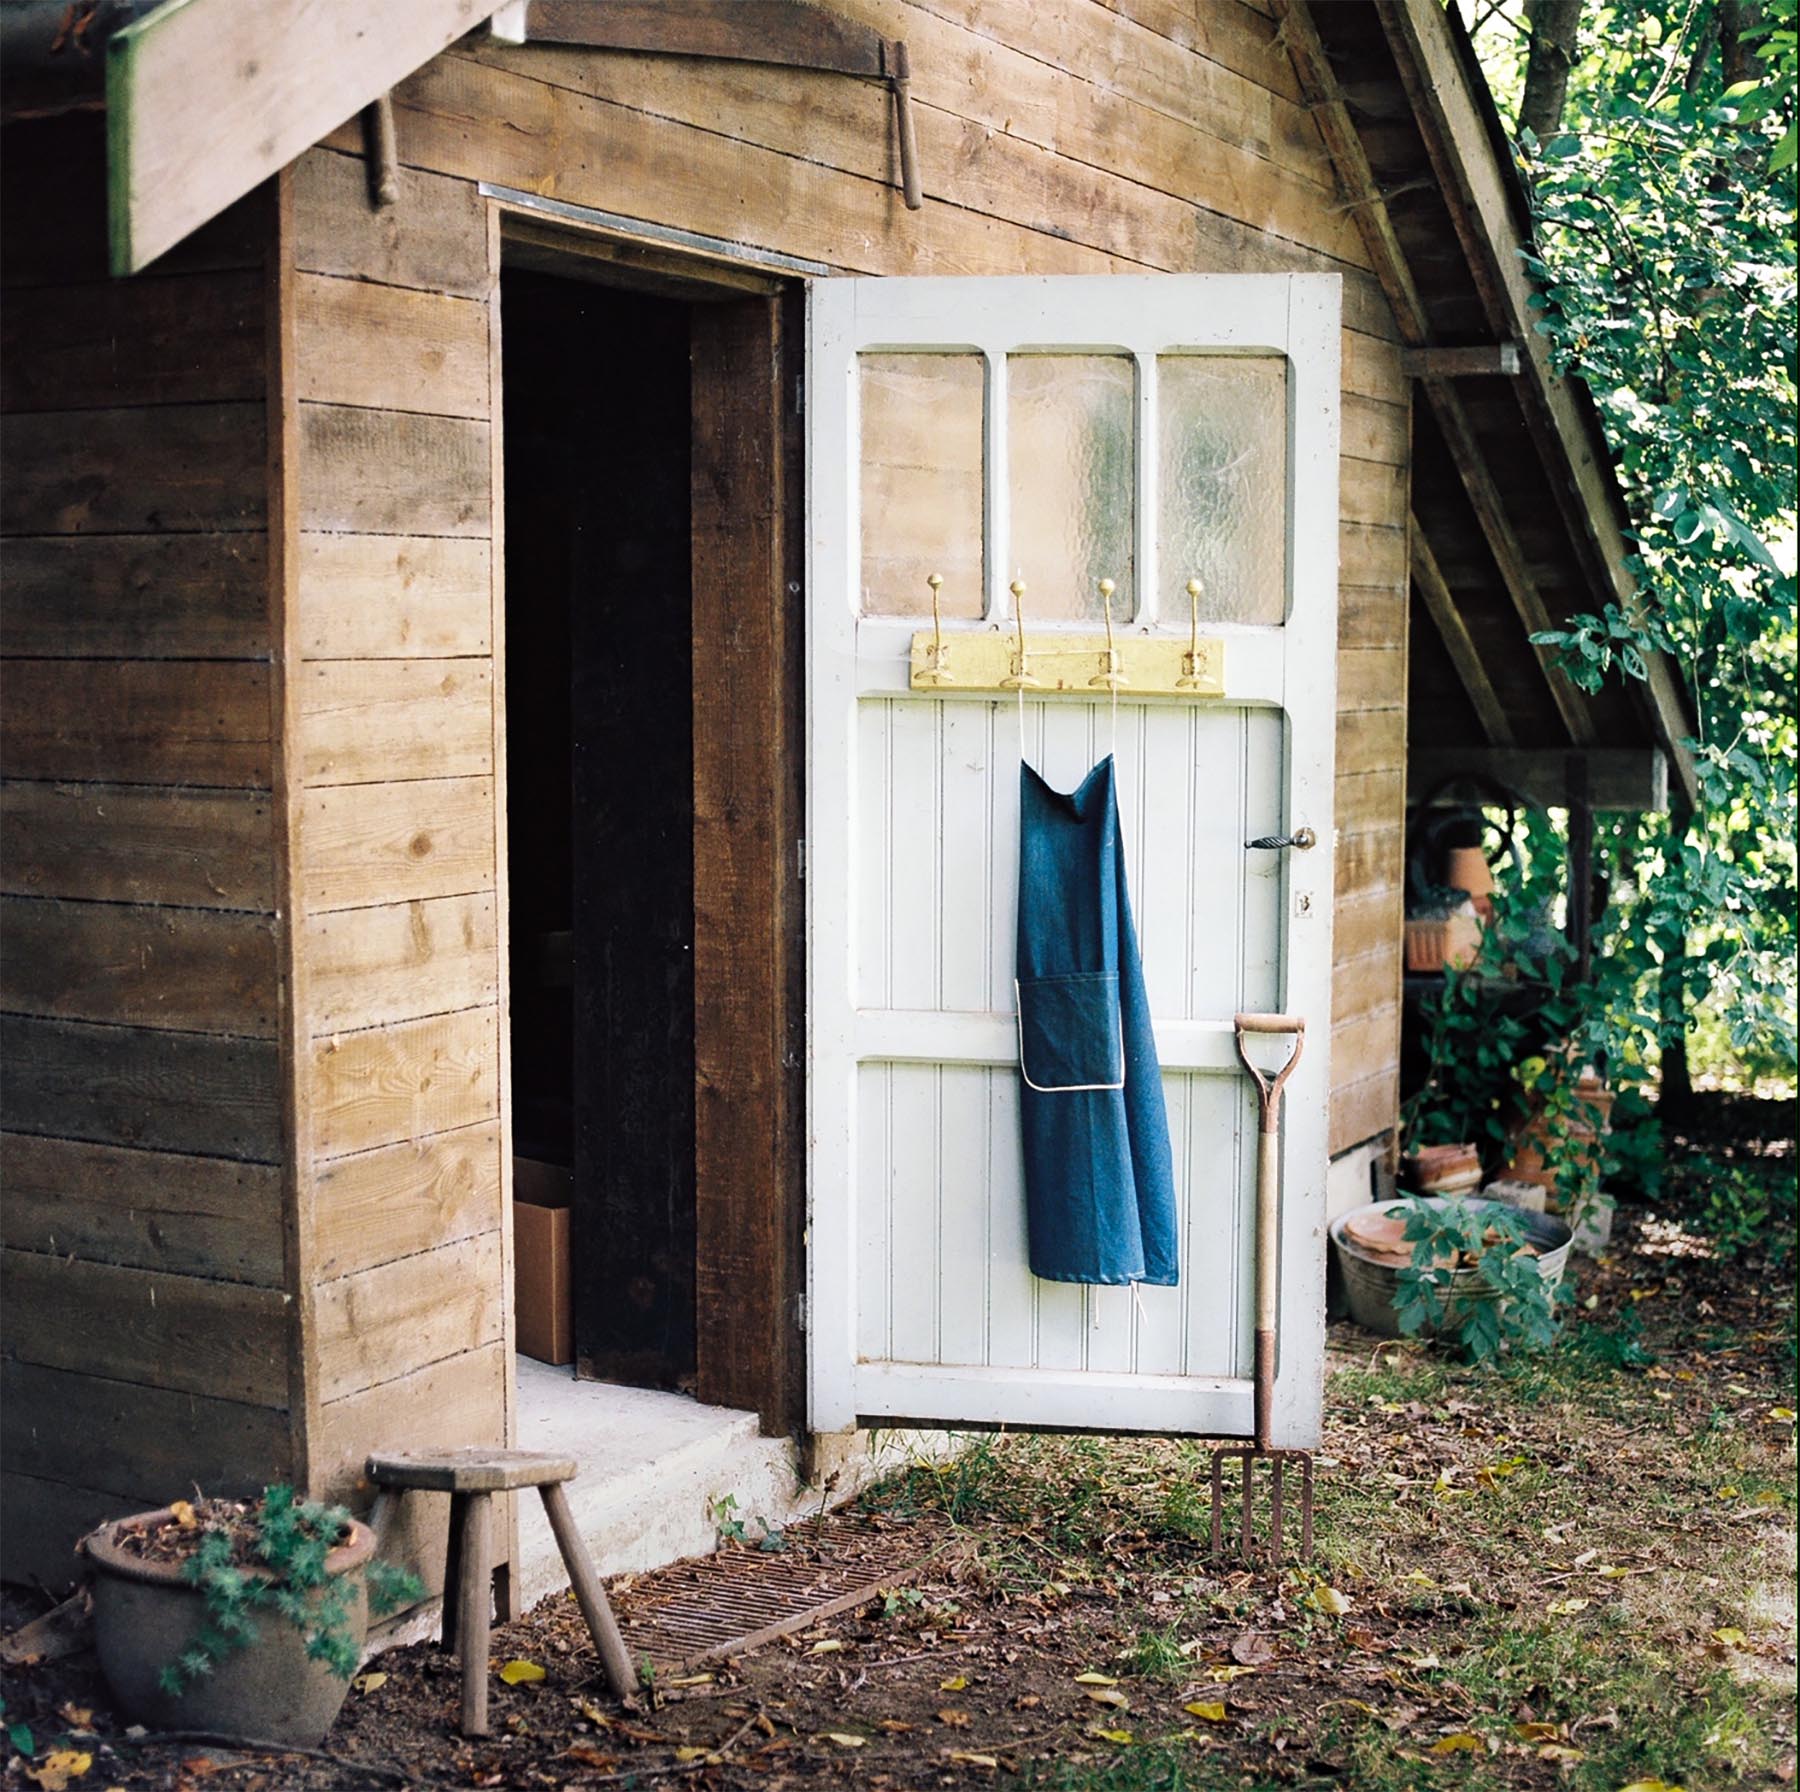 Amy Haghebaert: The Shed, 2021.